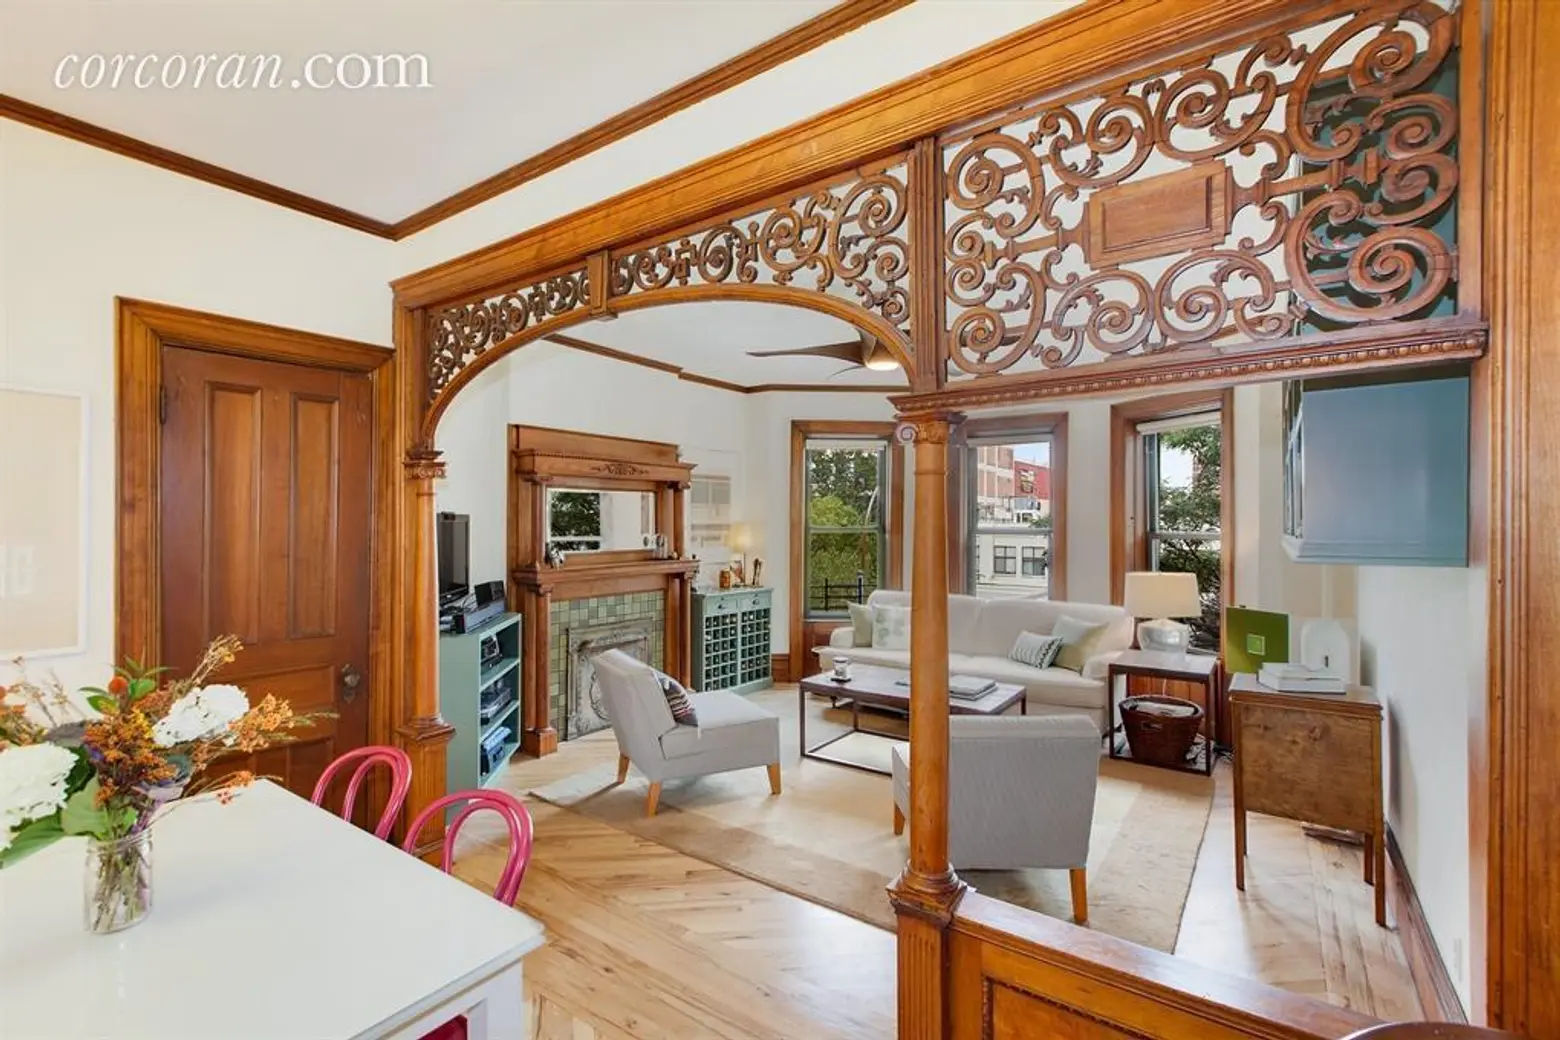 Gorgeous woodwork abounds at this $1.25M prewar co-op in Prospect Heights